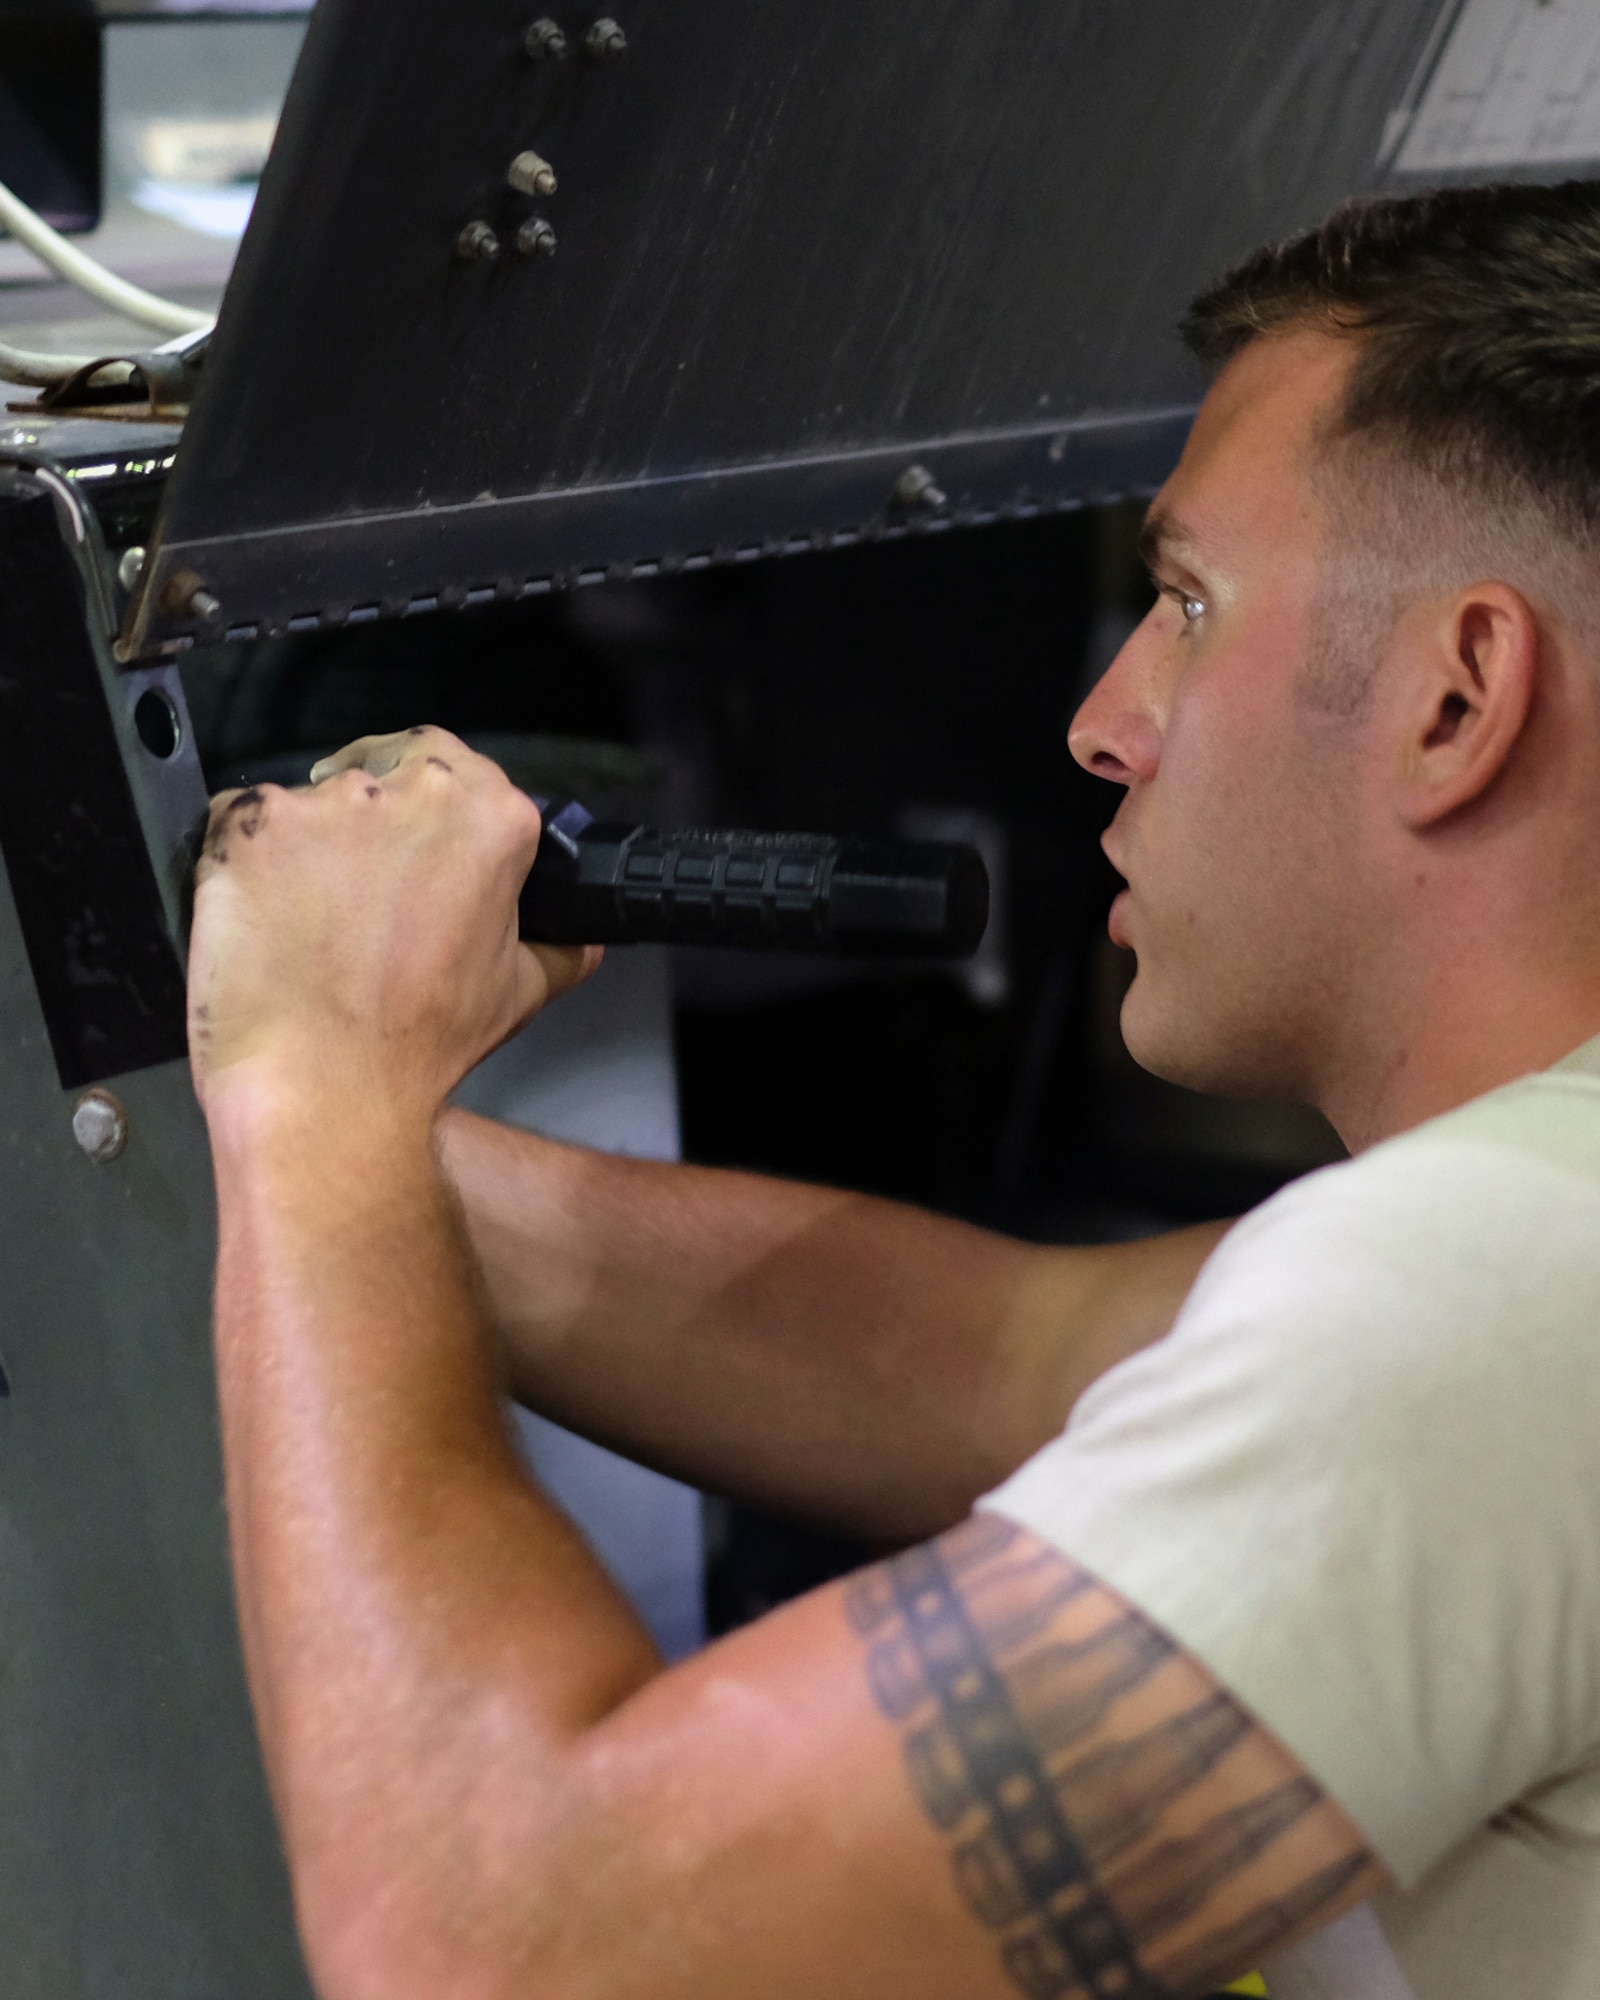 Senior Airman Nathan, 380th Expeditionary Maintenance Squadron aerospace ground equipment journeyman, inspects a floodlight July 12, 2017, at an undisclosed location in southwest Asia. AGE flight members work 24/7 overcoming obstacles in the AOR to ensure equipment needed to launch aircraft are always ready when needed. (U.S. Air Force photo by Senior Airman Preston Webb)